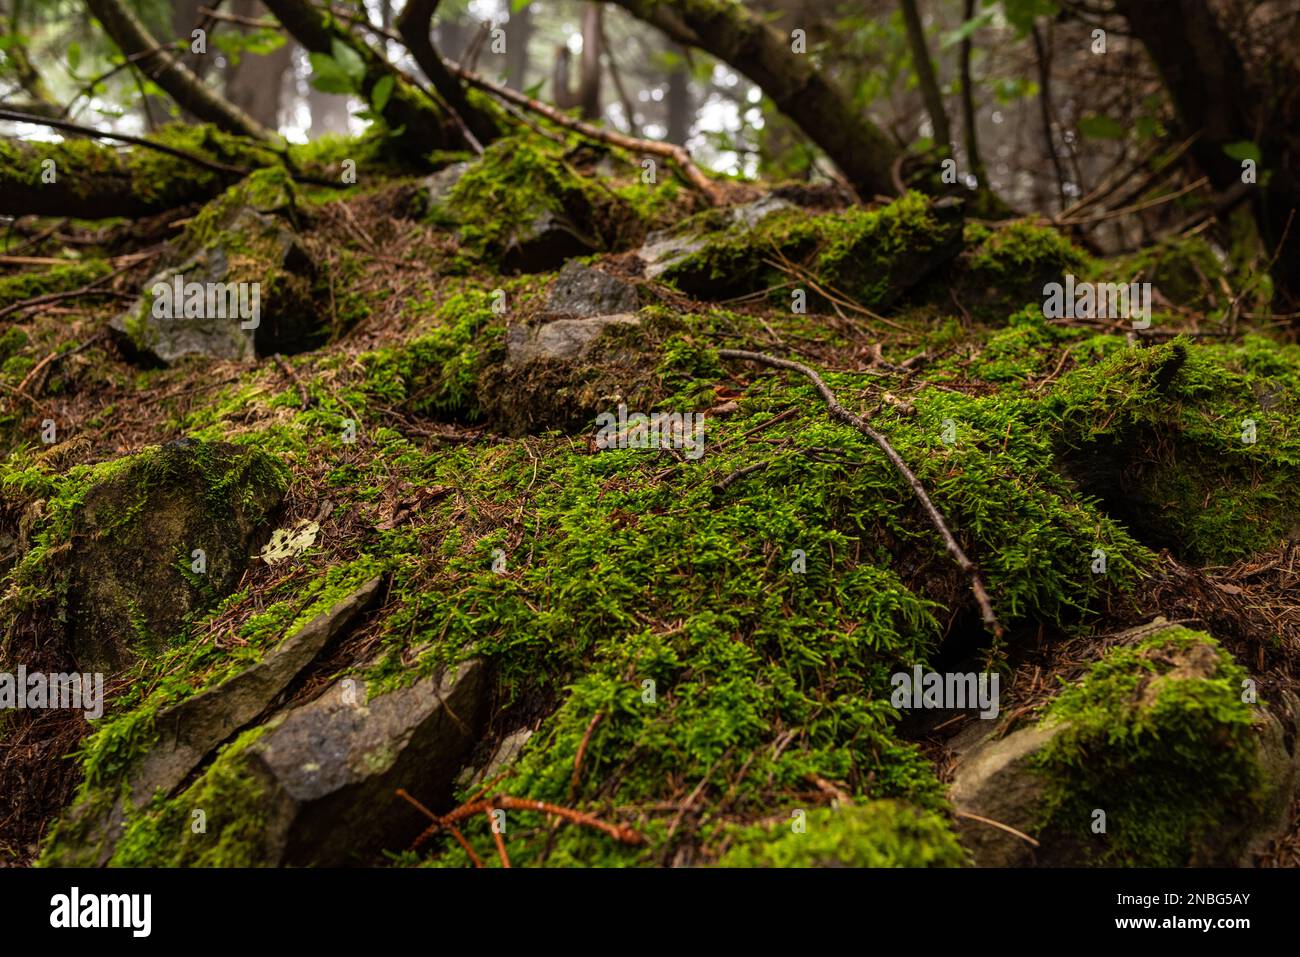 Background and texture of stones, moss and branches in the forest. Beautiful forest moss. Stock Photo